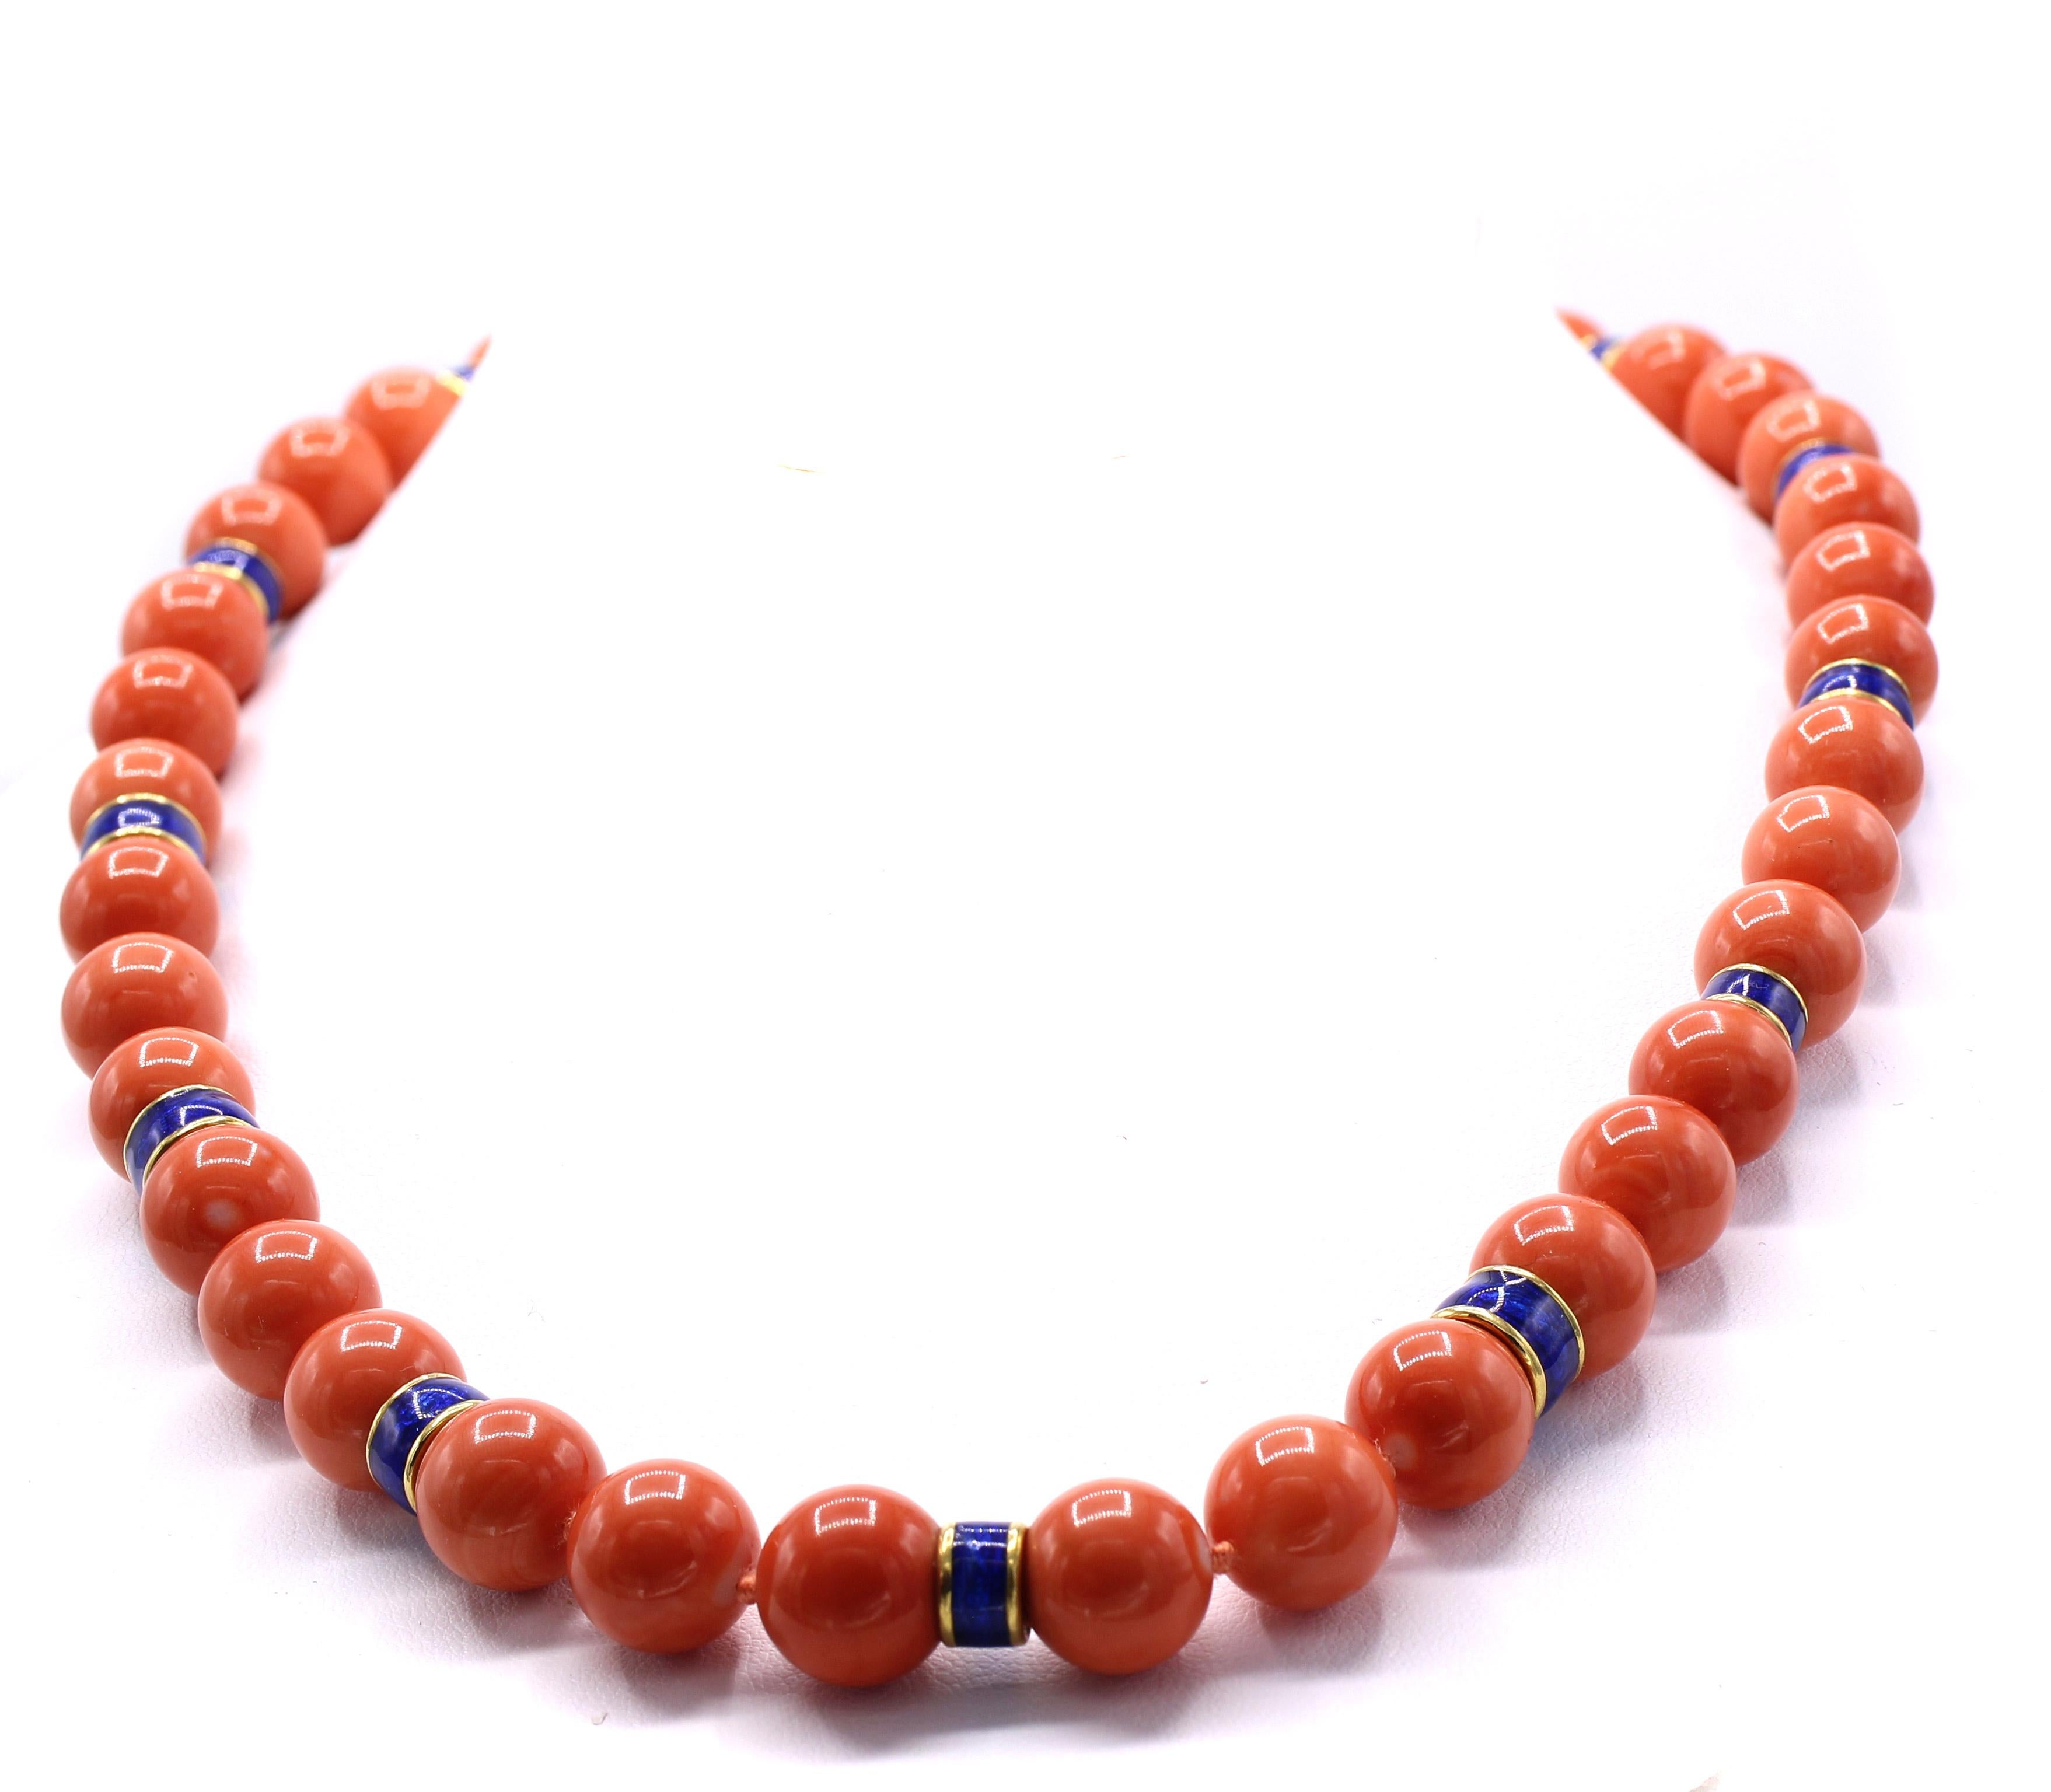 45 beautifully matched deep pink Mediterranean coral beads with an average diameter of 11 millimeters spaced by cobalt blue enamel 18 karat gold spacers are featured in this lovely and most wearable necklace by David Webb. The perfect length of